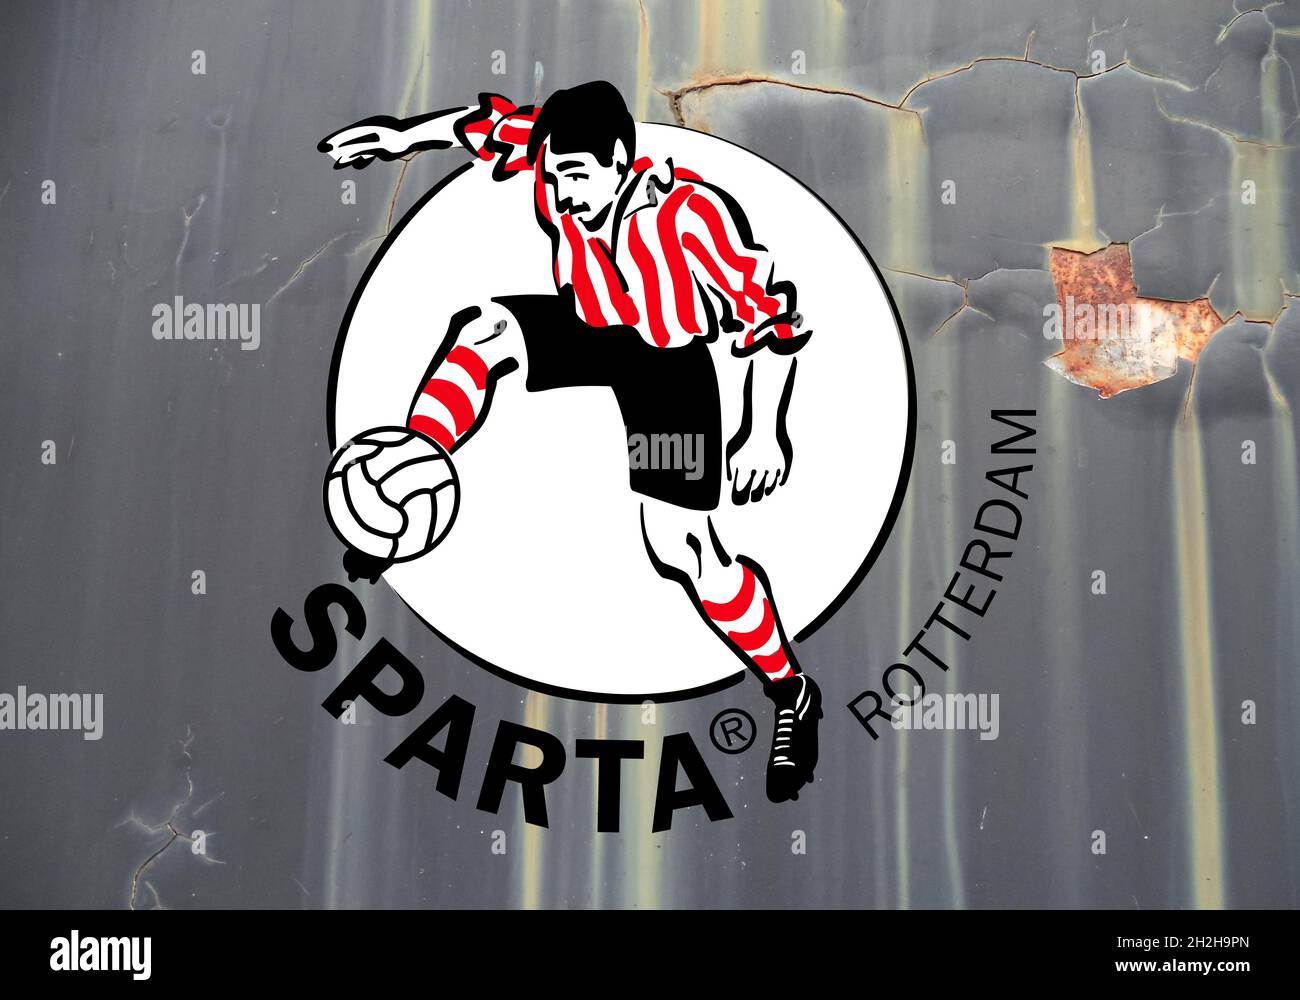 Coat of arms FC Sparta Rotterdam, Rotterdam, football club from the  Netherlands Stock Photo - Alamy